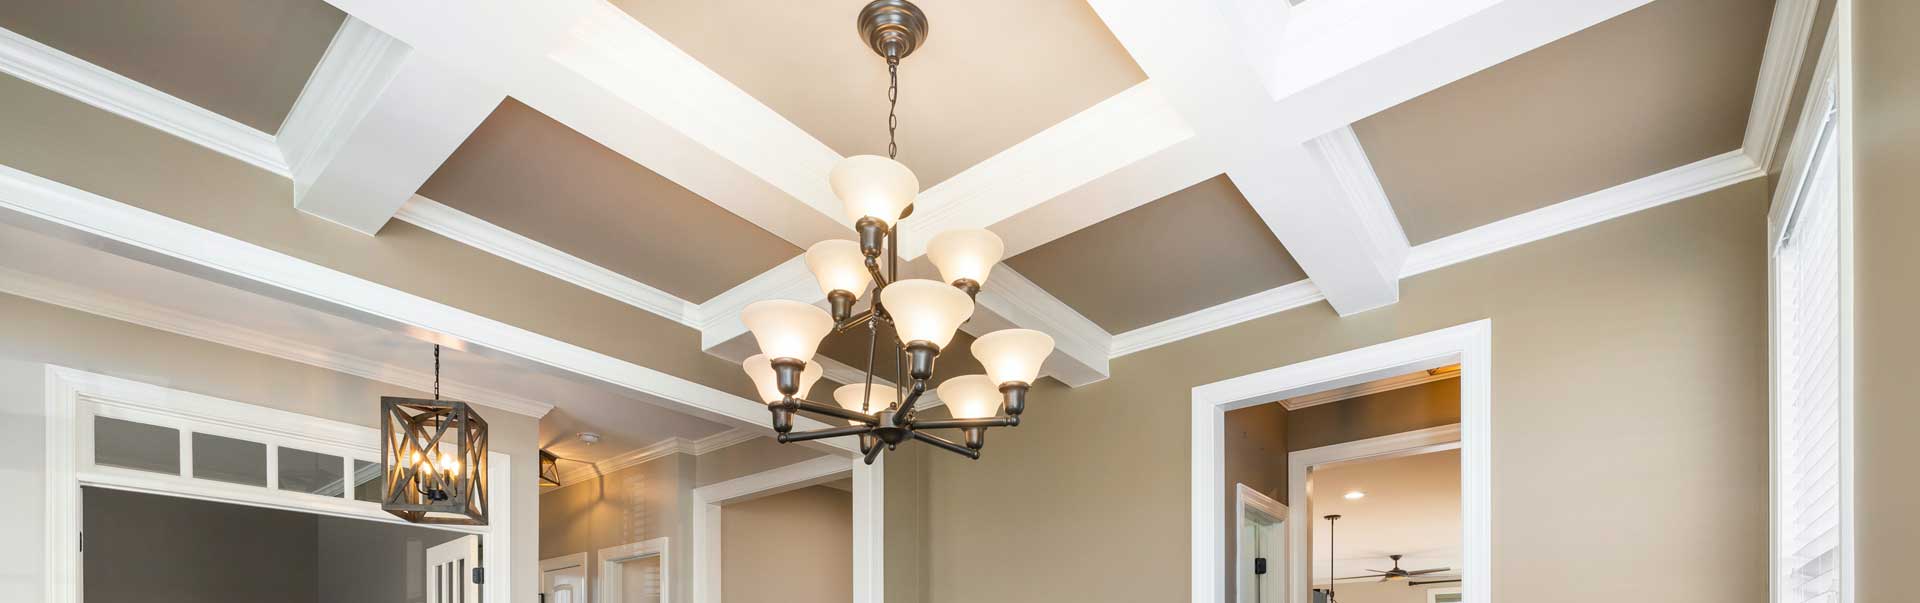 Coffered Ceiling Cost: Material, Labor and Installation